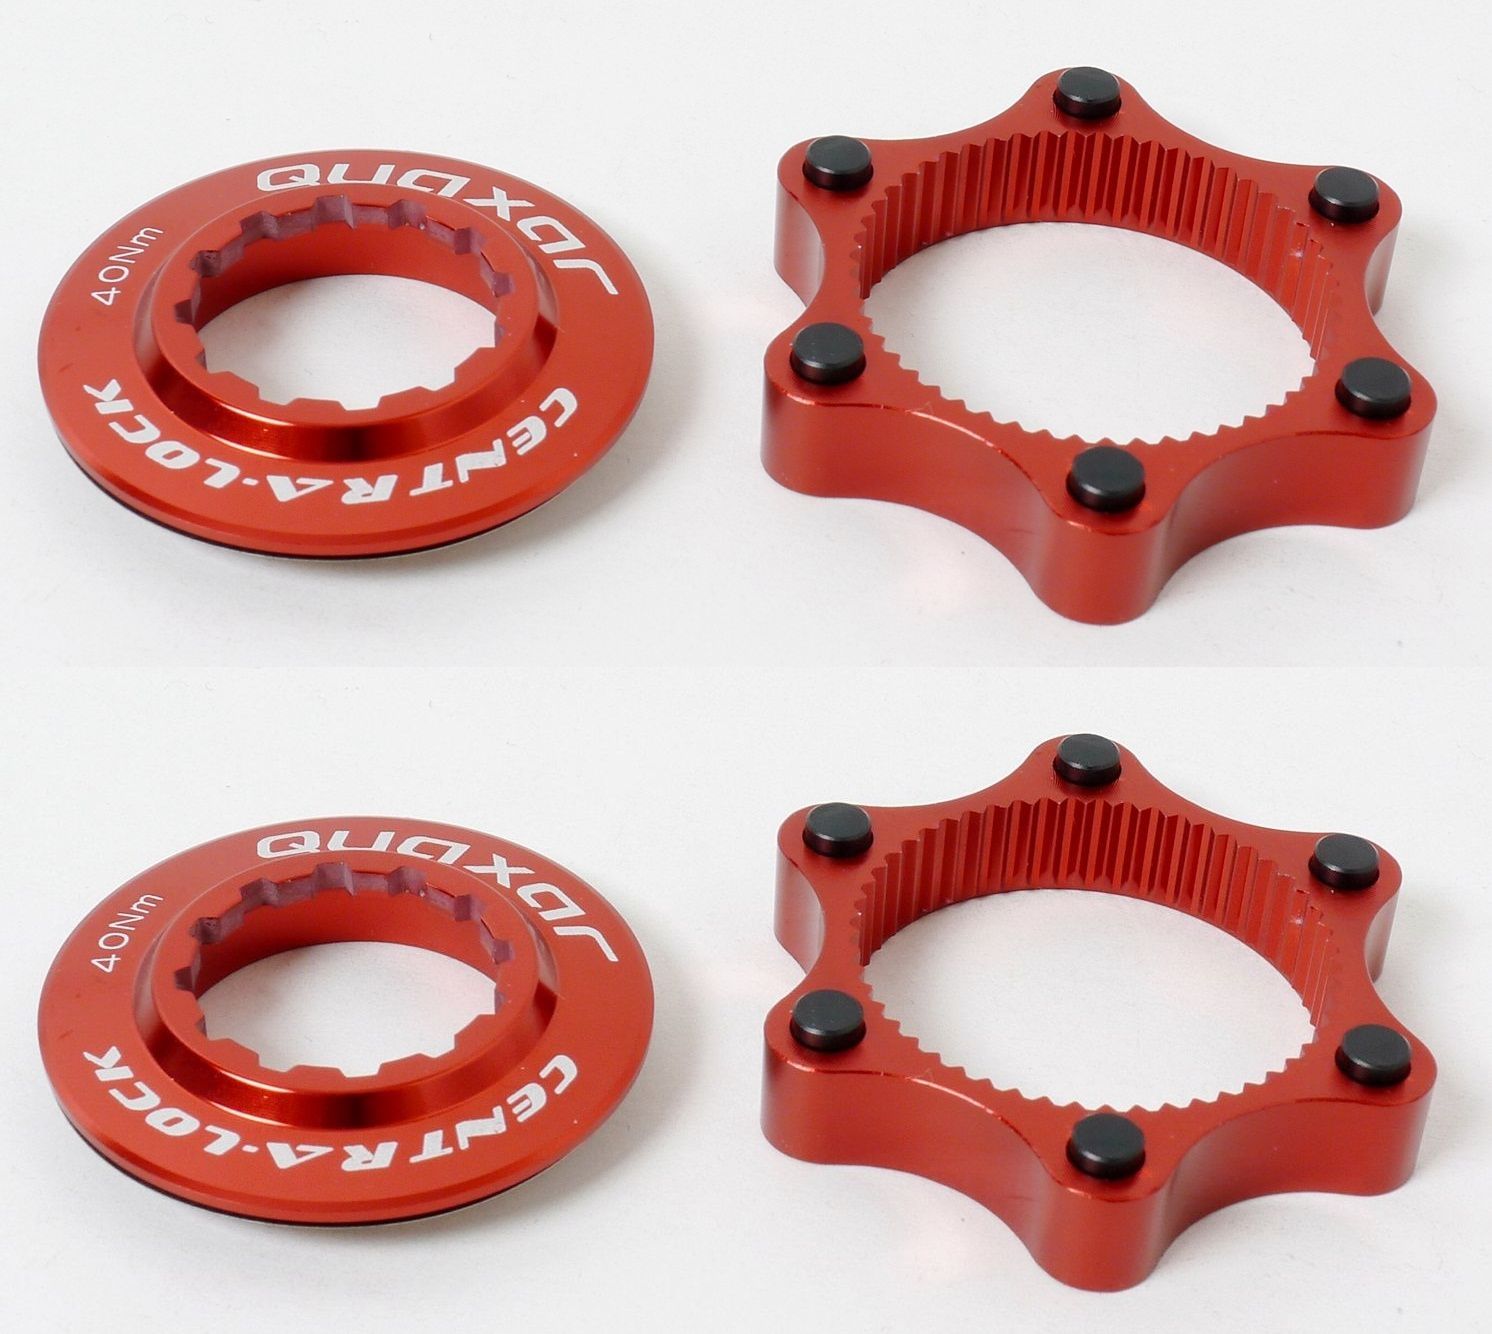 Mr Ride Quaxar Center Lock Disc Rotor Adapter for 6 Bolts MTB Bike Red